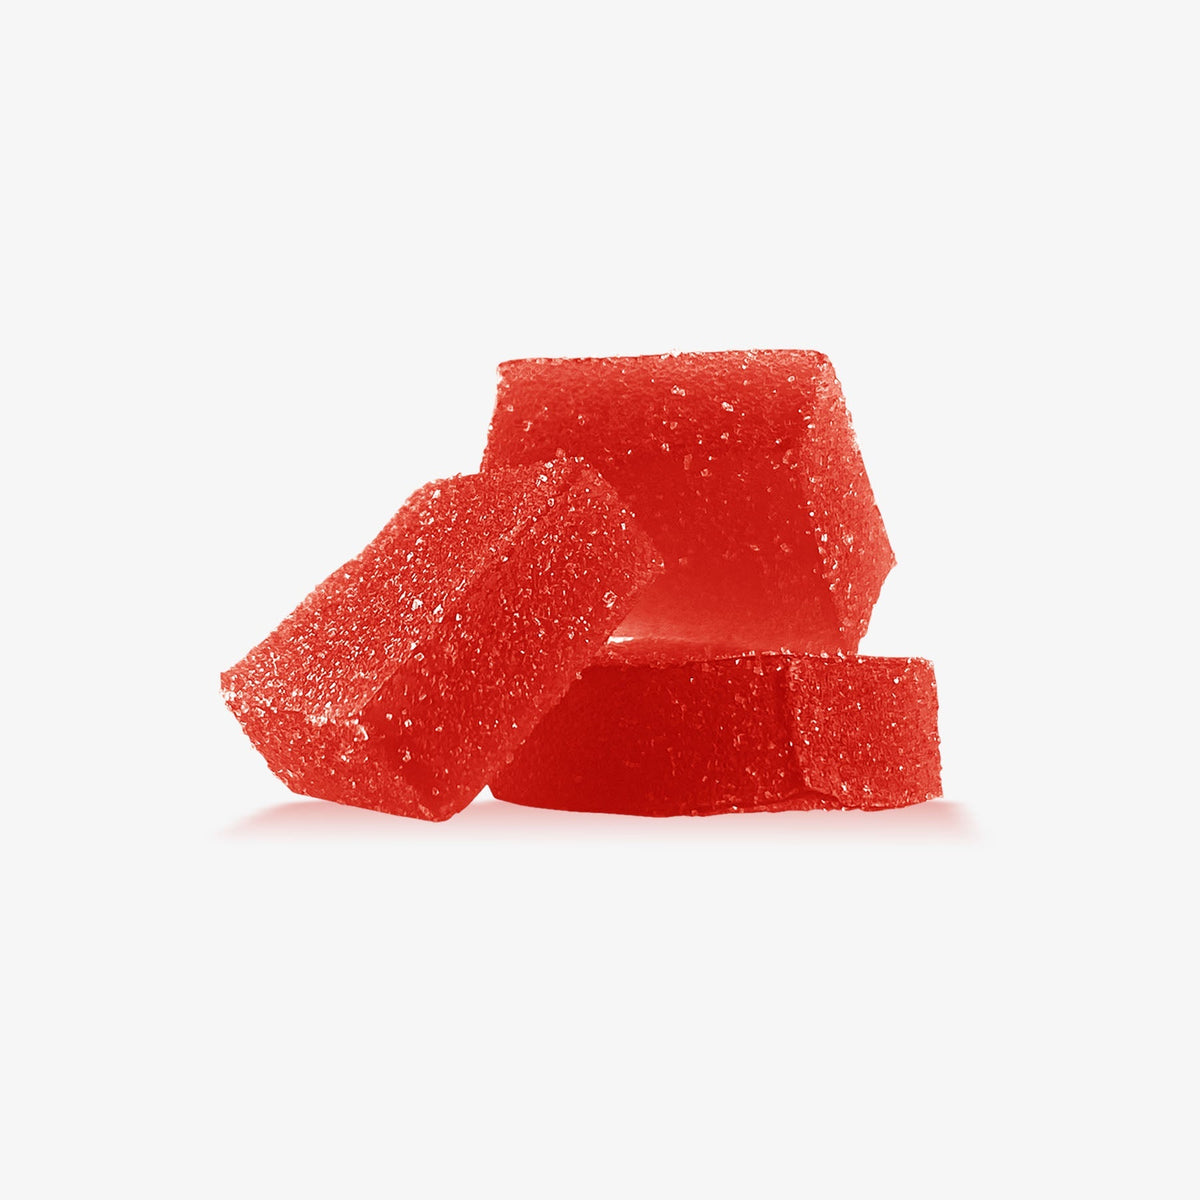 rubber duckie thc-o d8 blended gummies strawberry detail